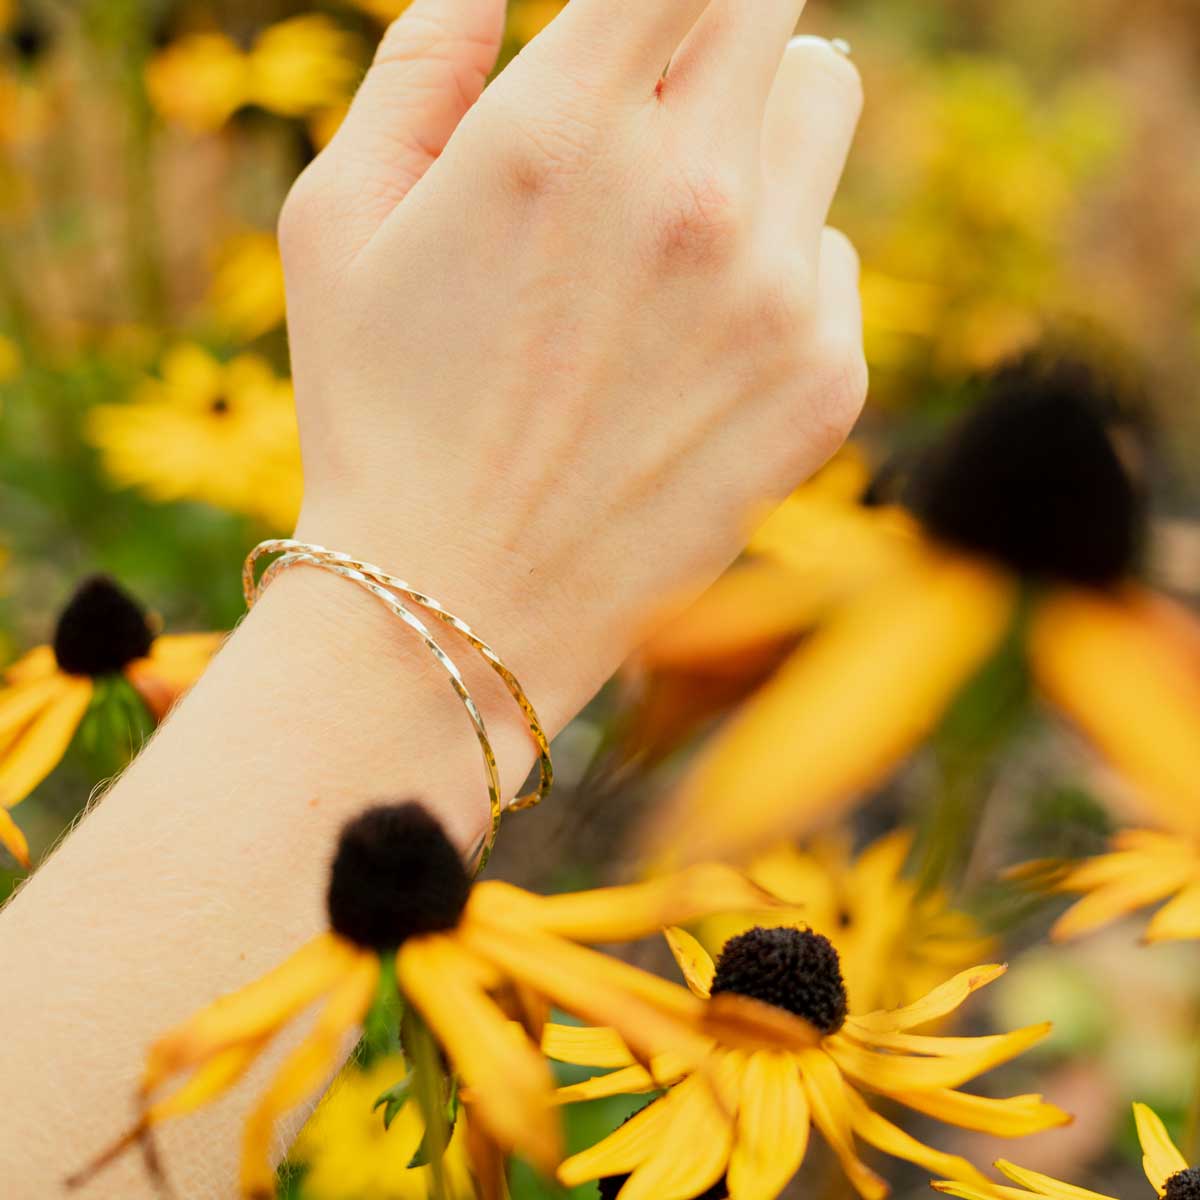 Gold and silver twisted torc bracelets being worn on a wrist in a field full of flowers